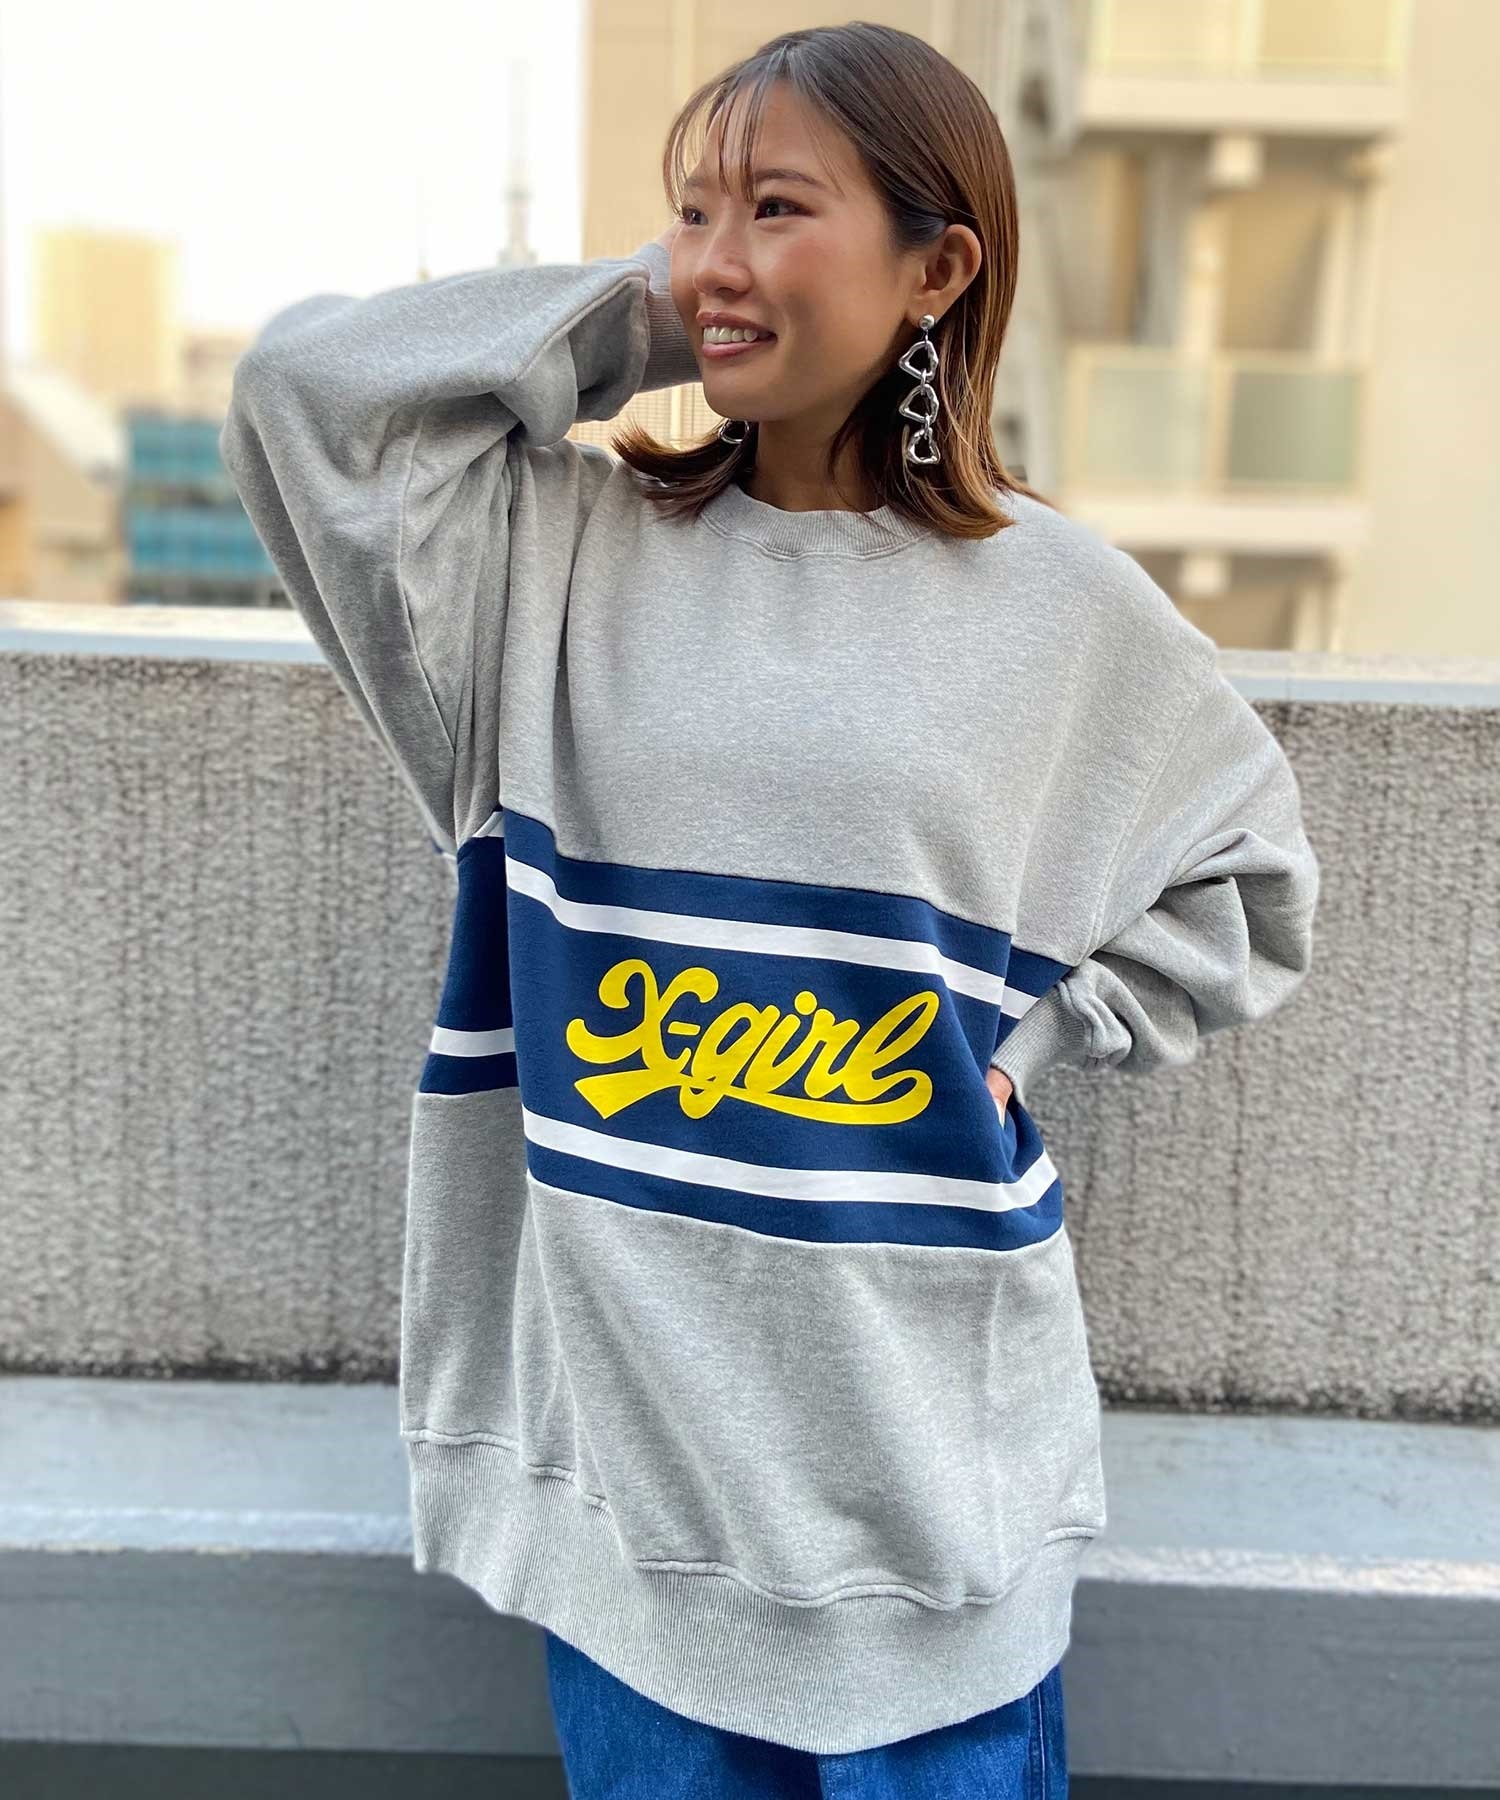 X-GIRL/エックスガール CONTRAST COLOR SWEAT TOP レディース